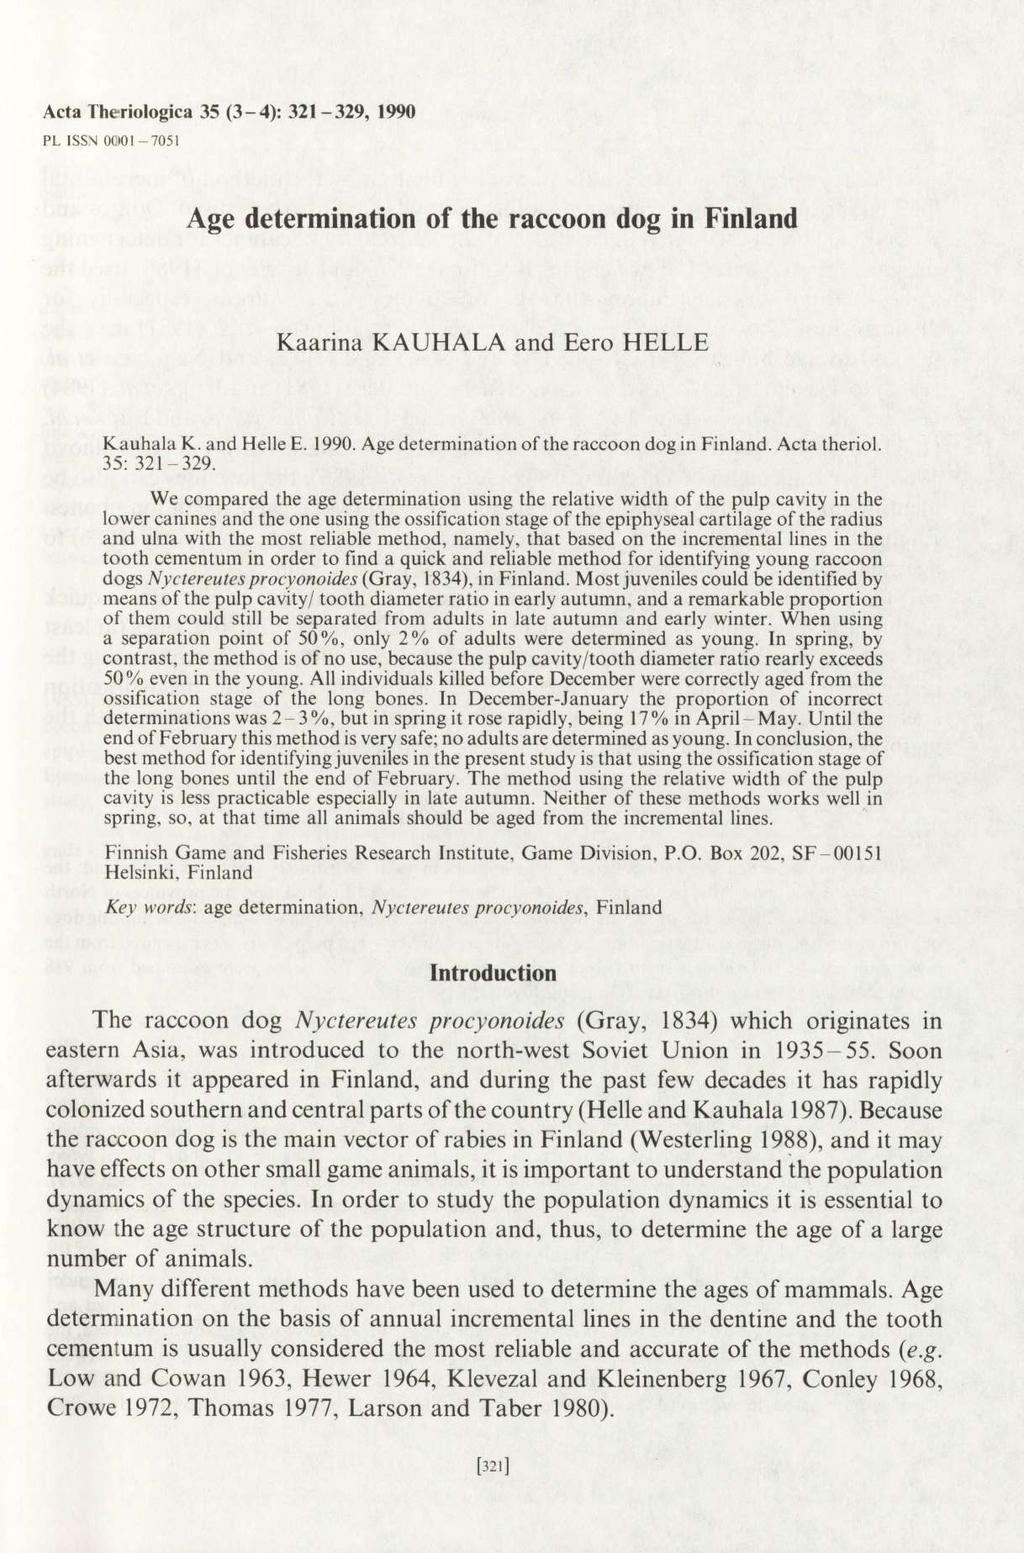 Acta T heriologica 35 (3-4): 321-329, 1990 PL ISSN 0001-7051 Age determination of the raccoon dog in Finland Kaarina KAUHALA and Eero HELLE Kauhala K. and Helle E. 1990. Age determination of the raccoon dog in Finland. Acta theriol.